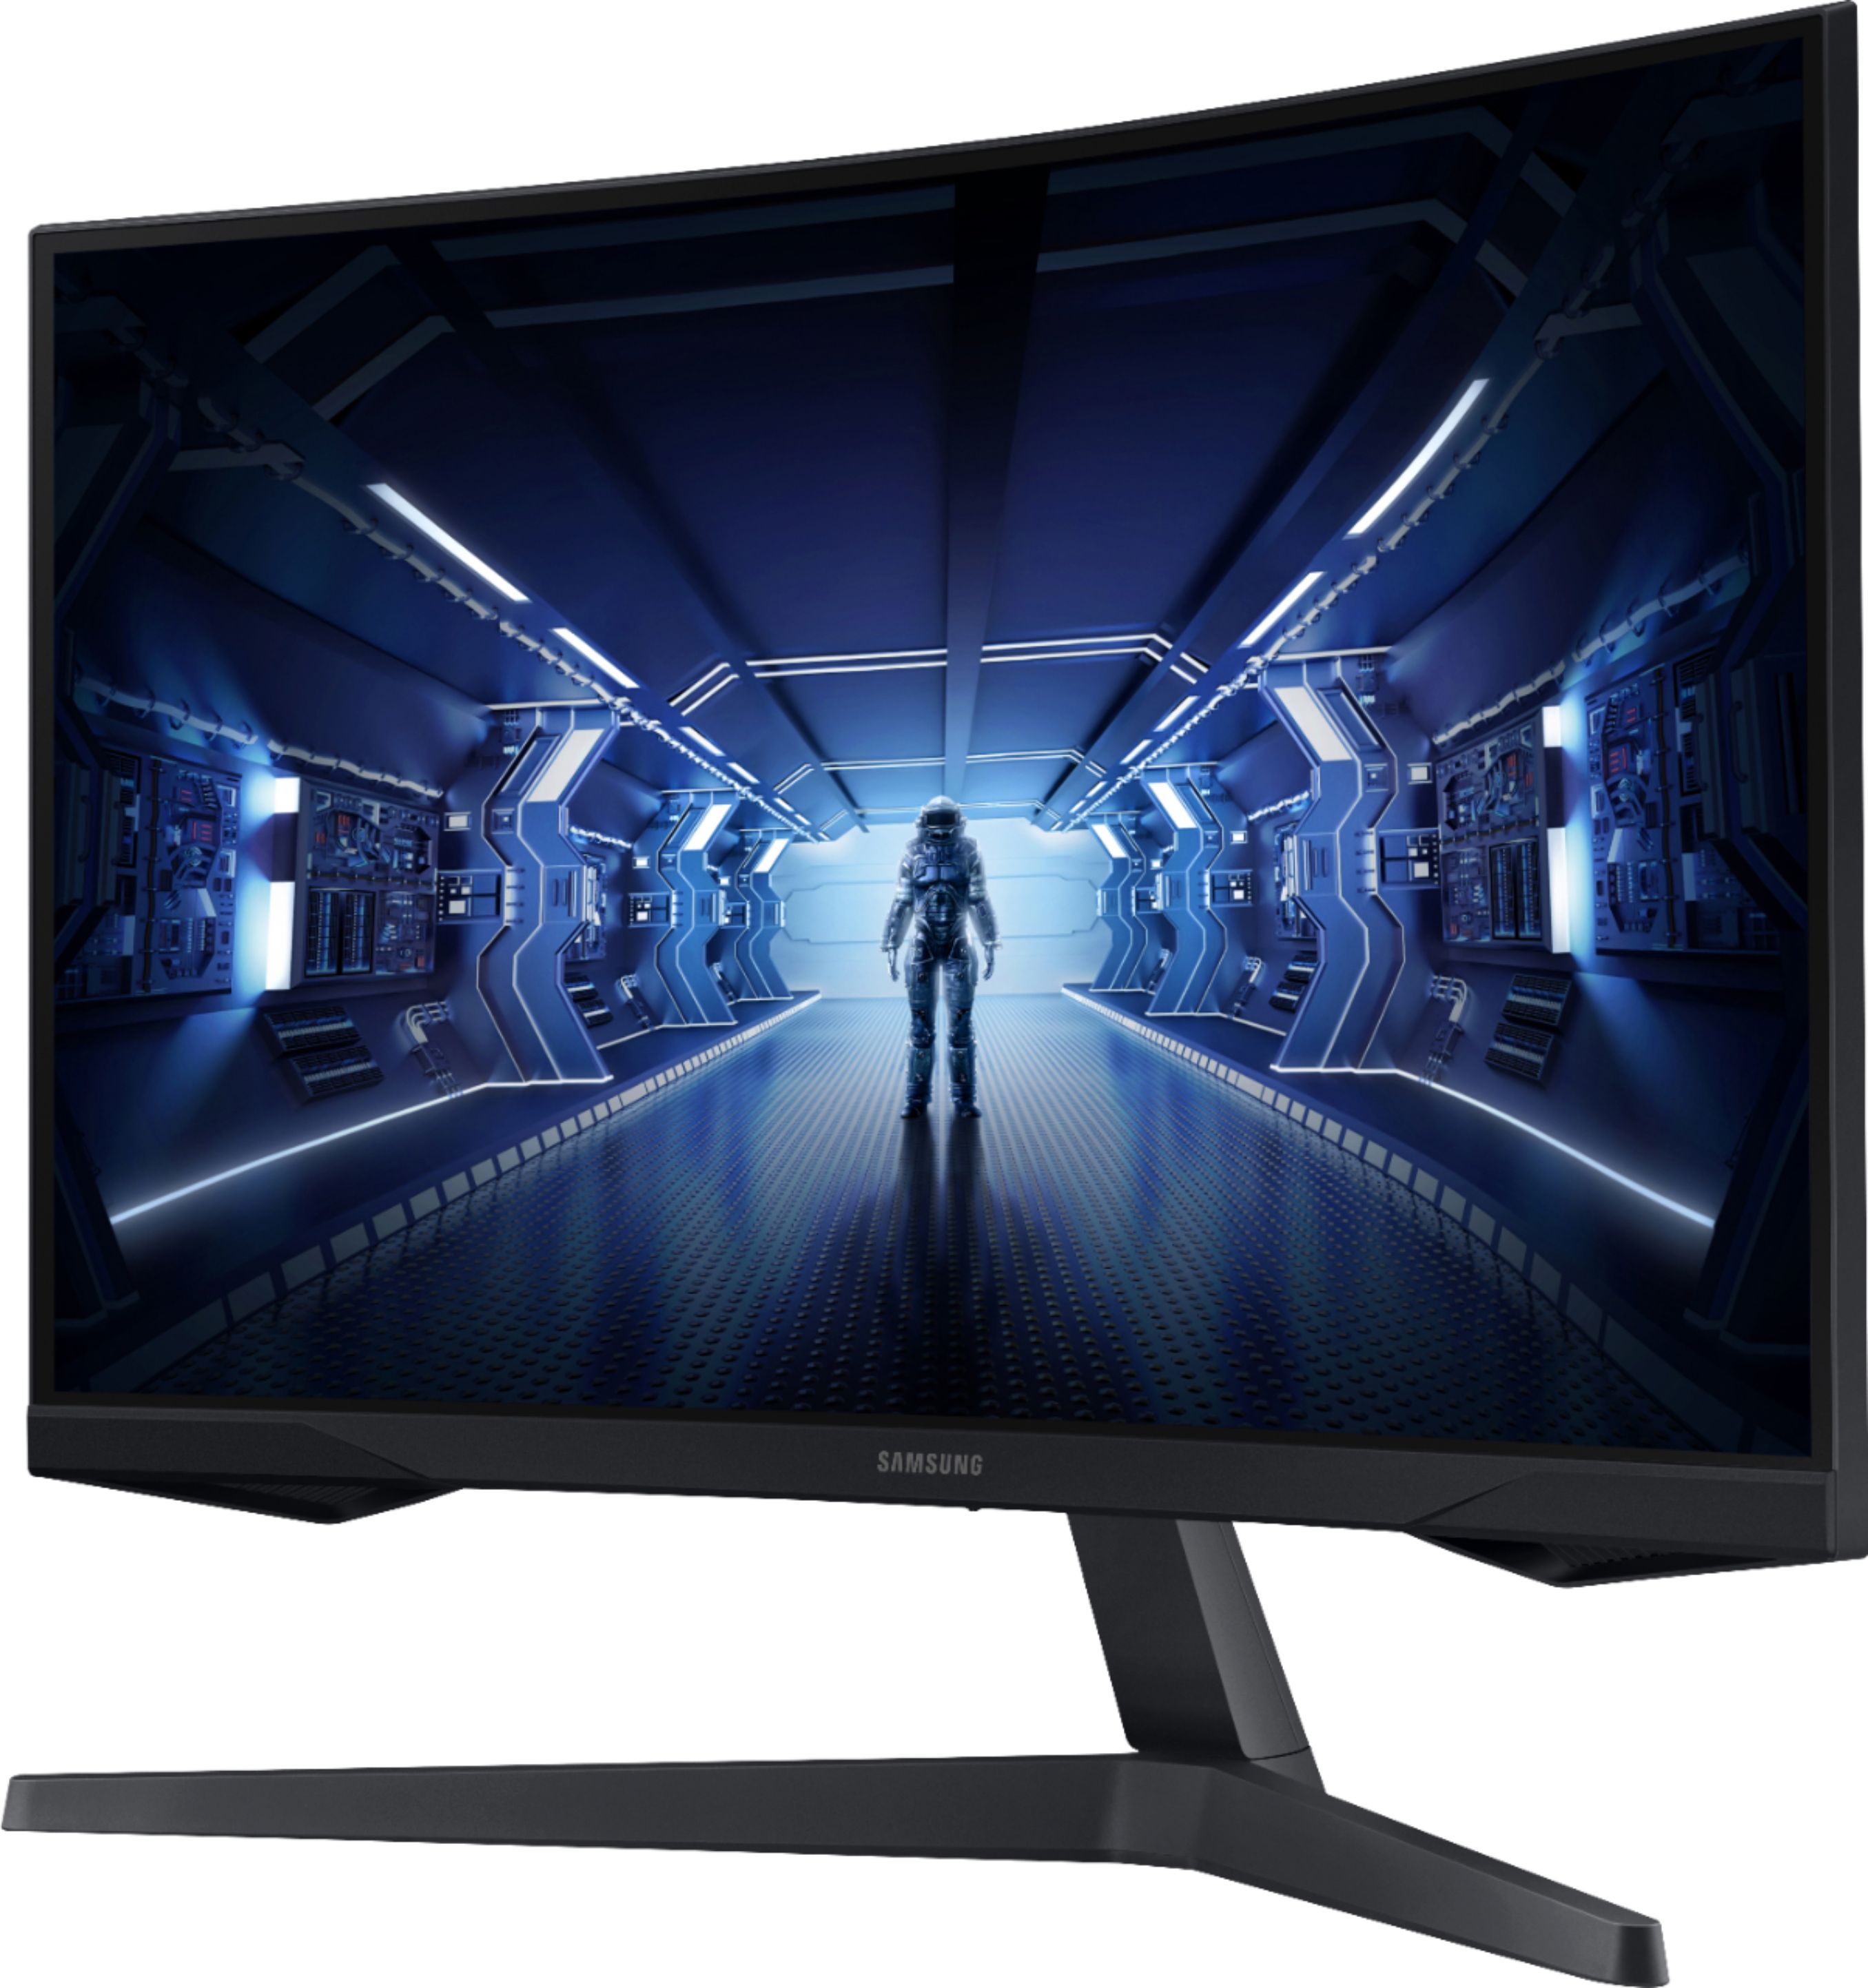 Left View: GIGABYTE - 32" LED Curved QHD FreeSync Monitor with HDR (HDMI, DisplayPort, USB) - Black